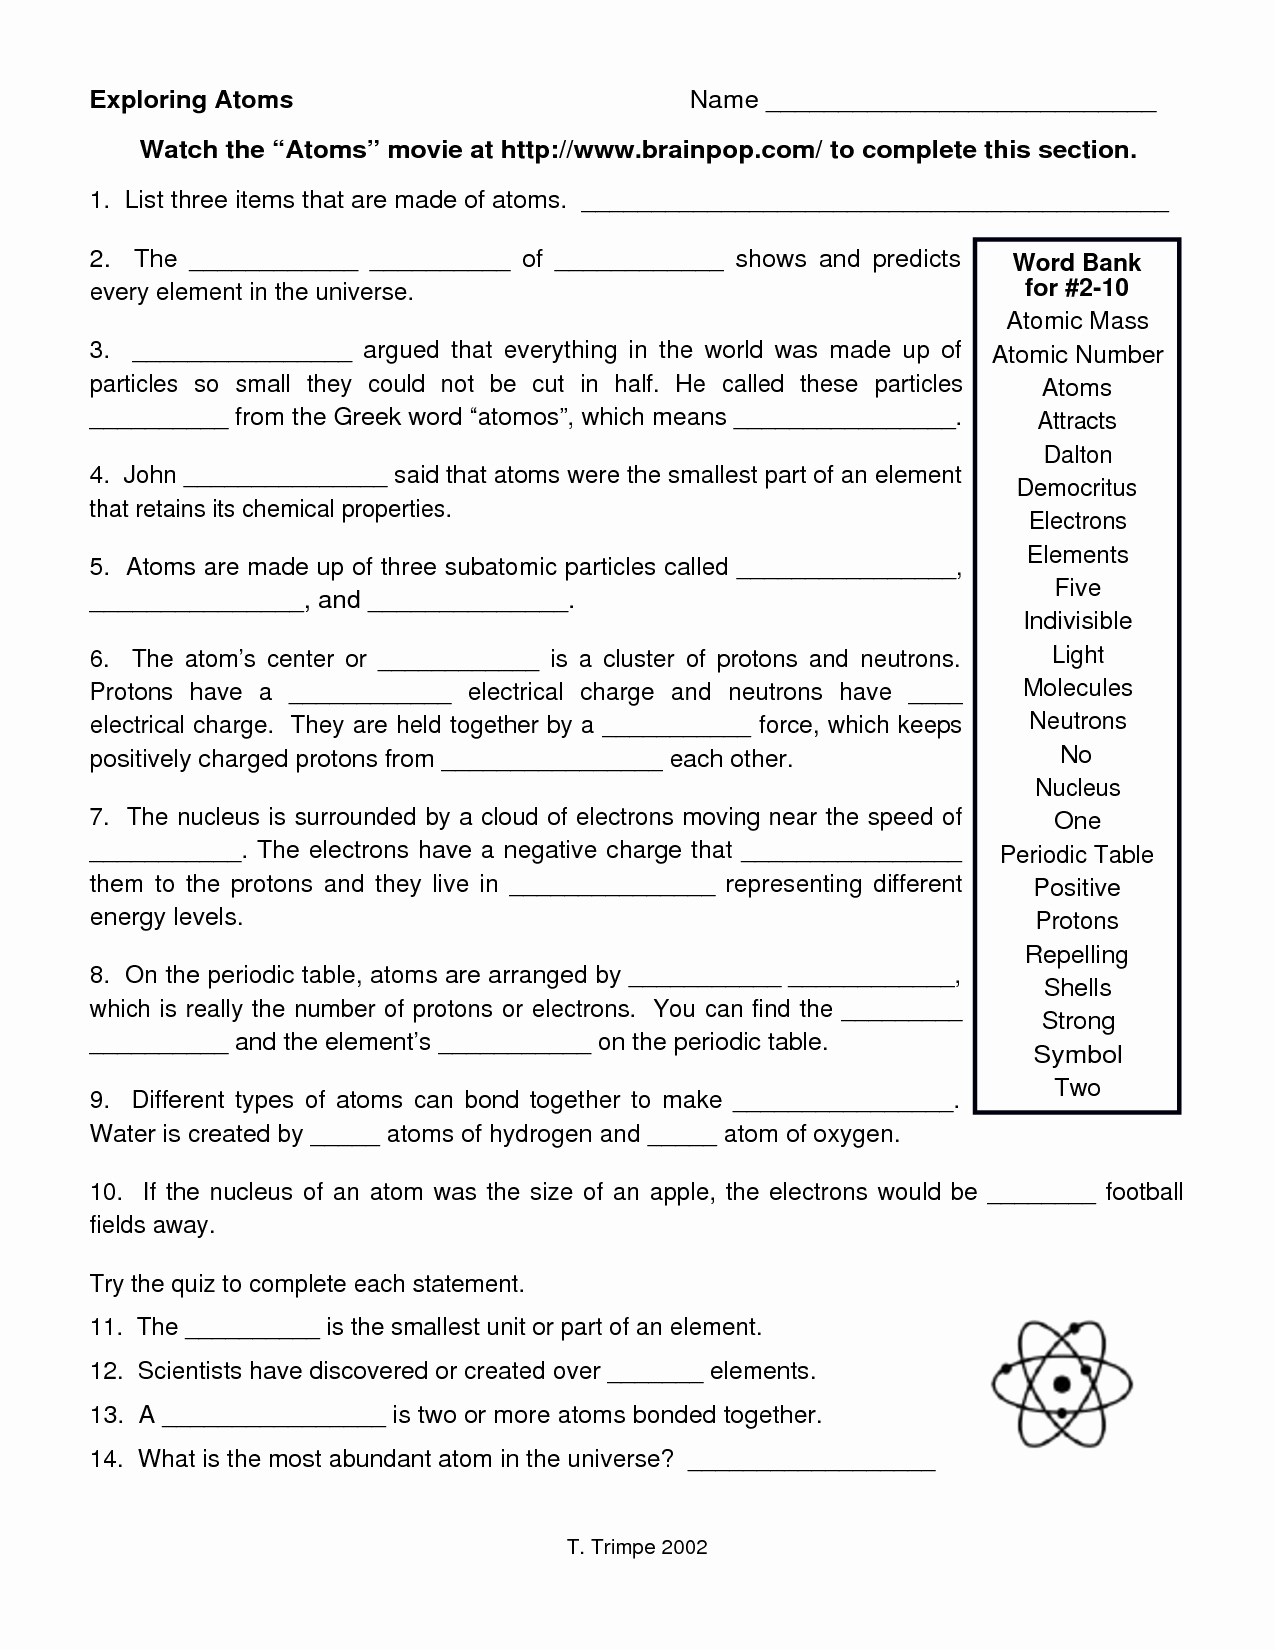 Static Electricity Worksheet Answers Luxury Bill Nye Static Electricity Worksheet Answers